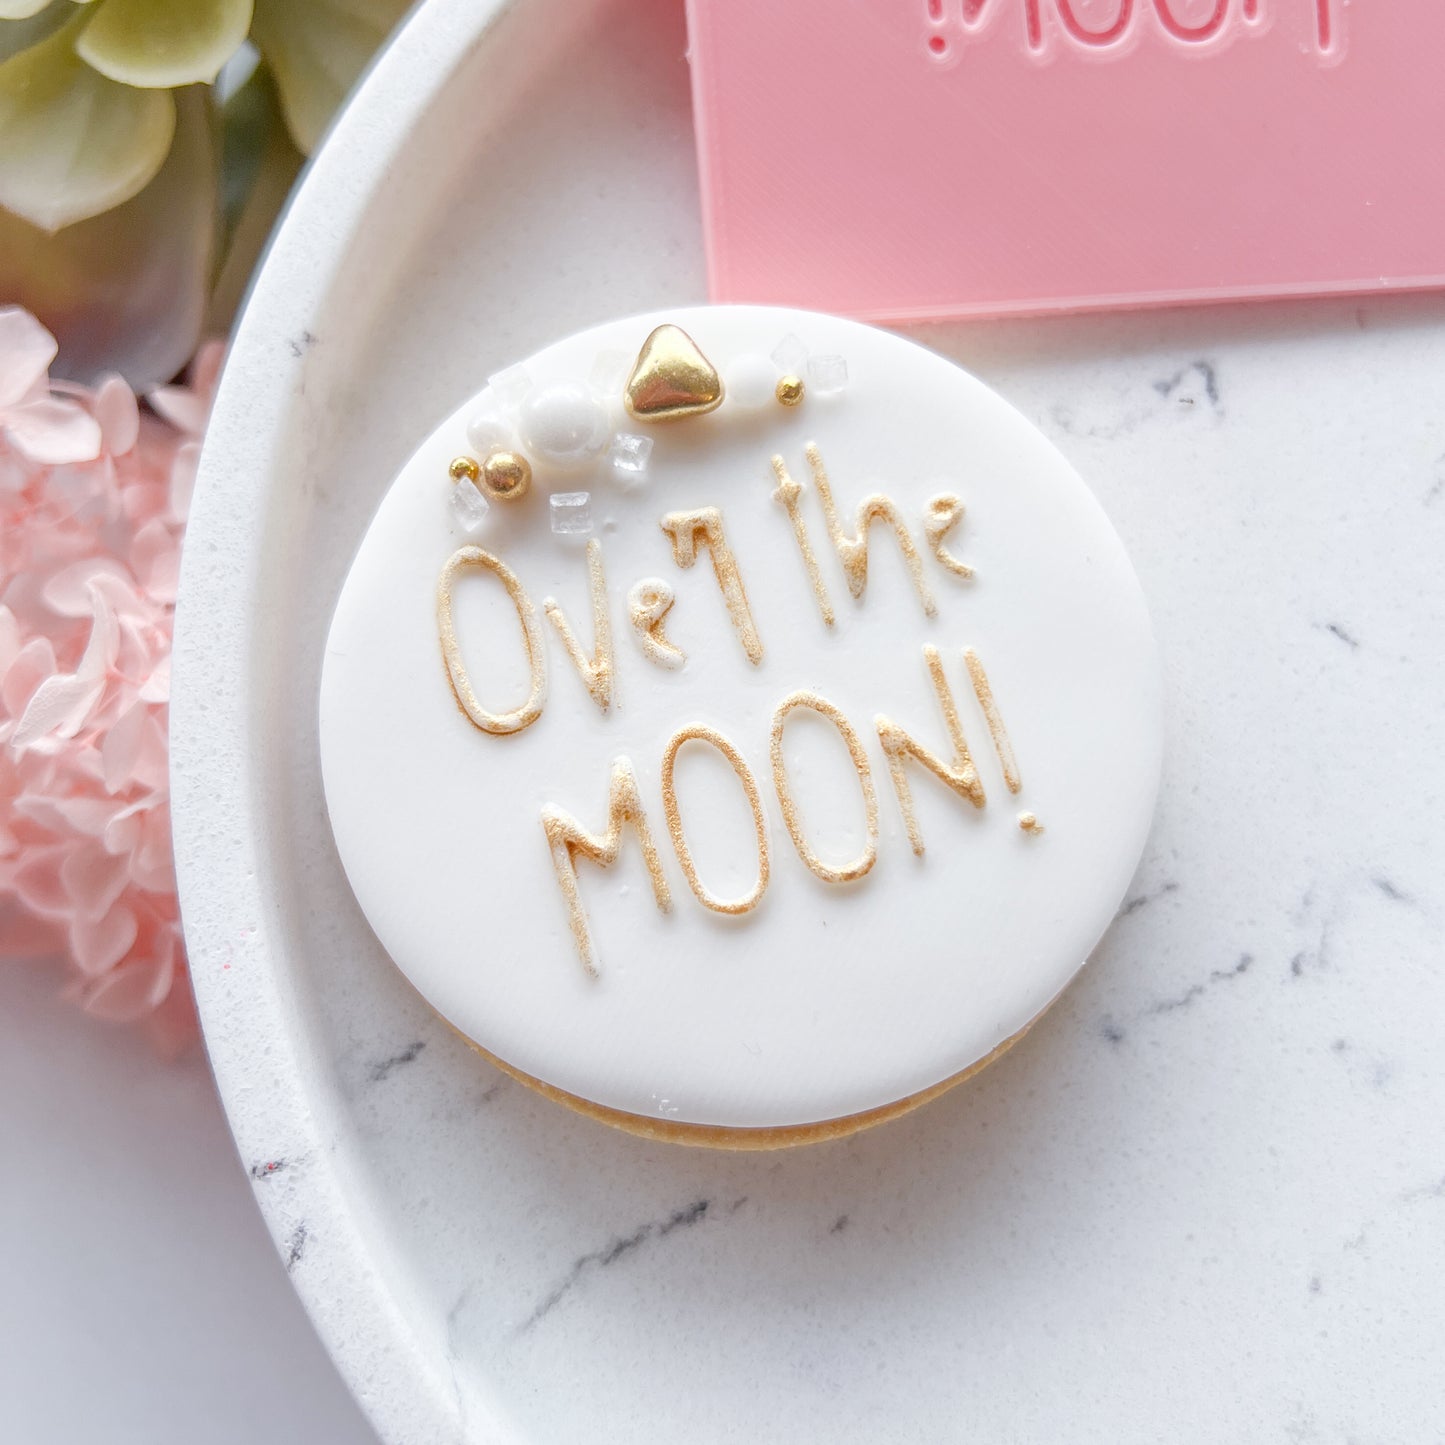 "Over the Moon" - Embossing Stamp